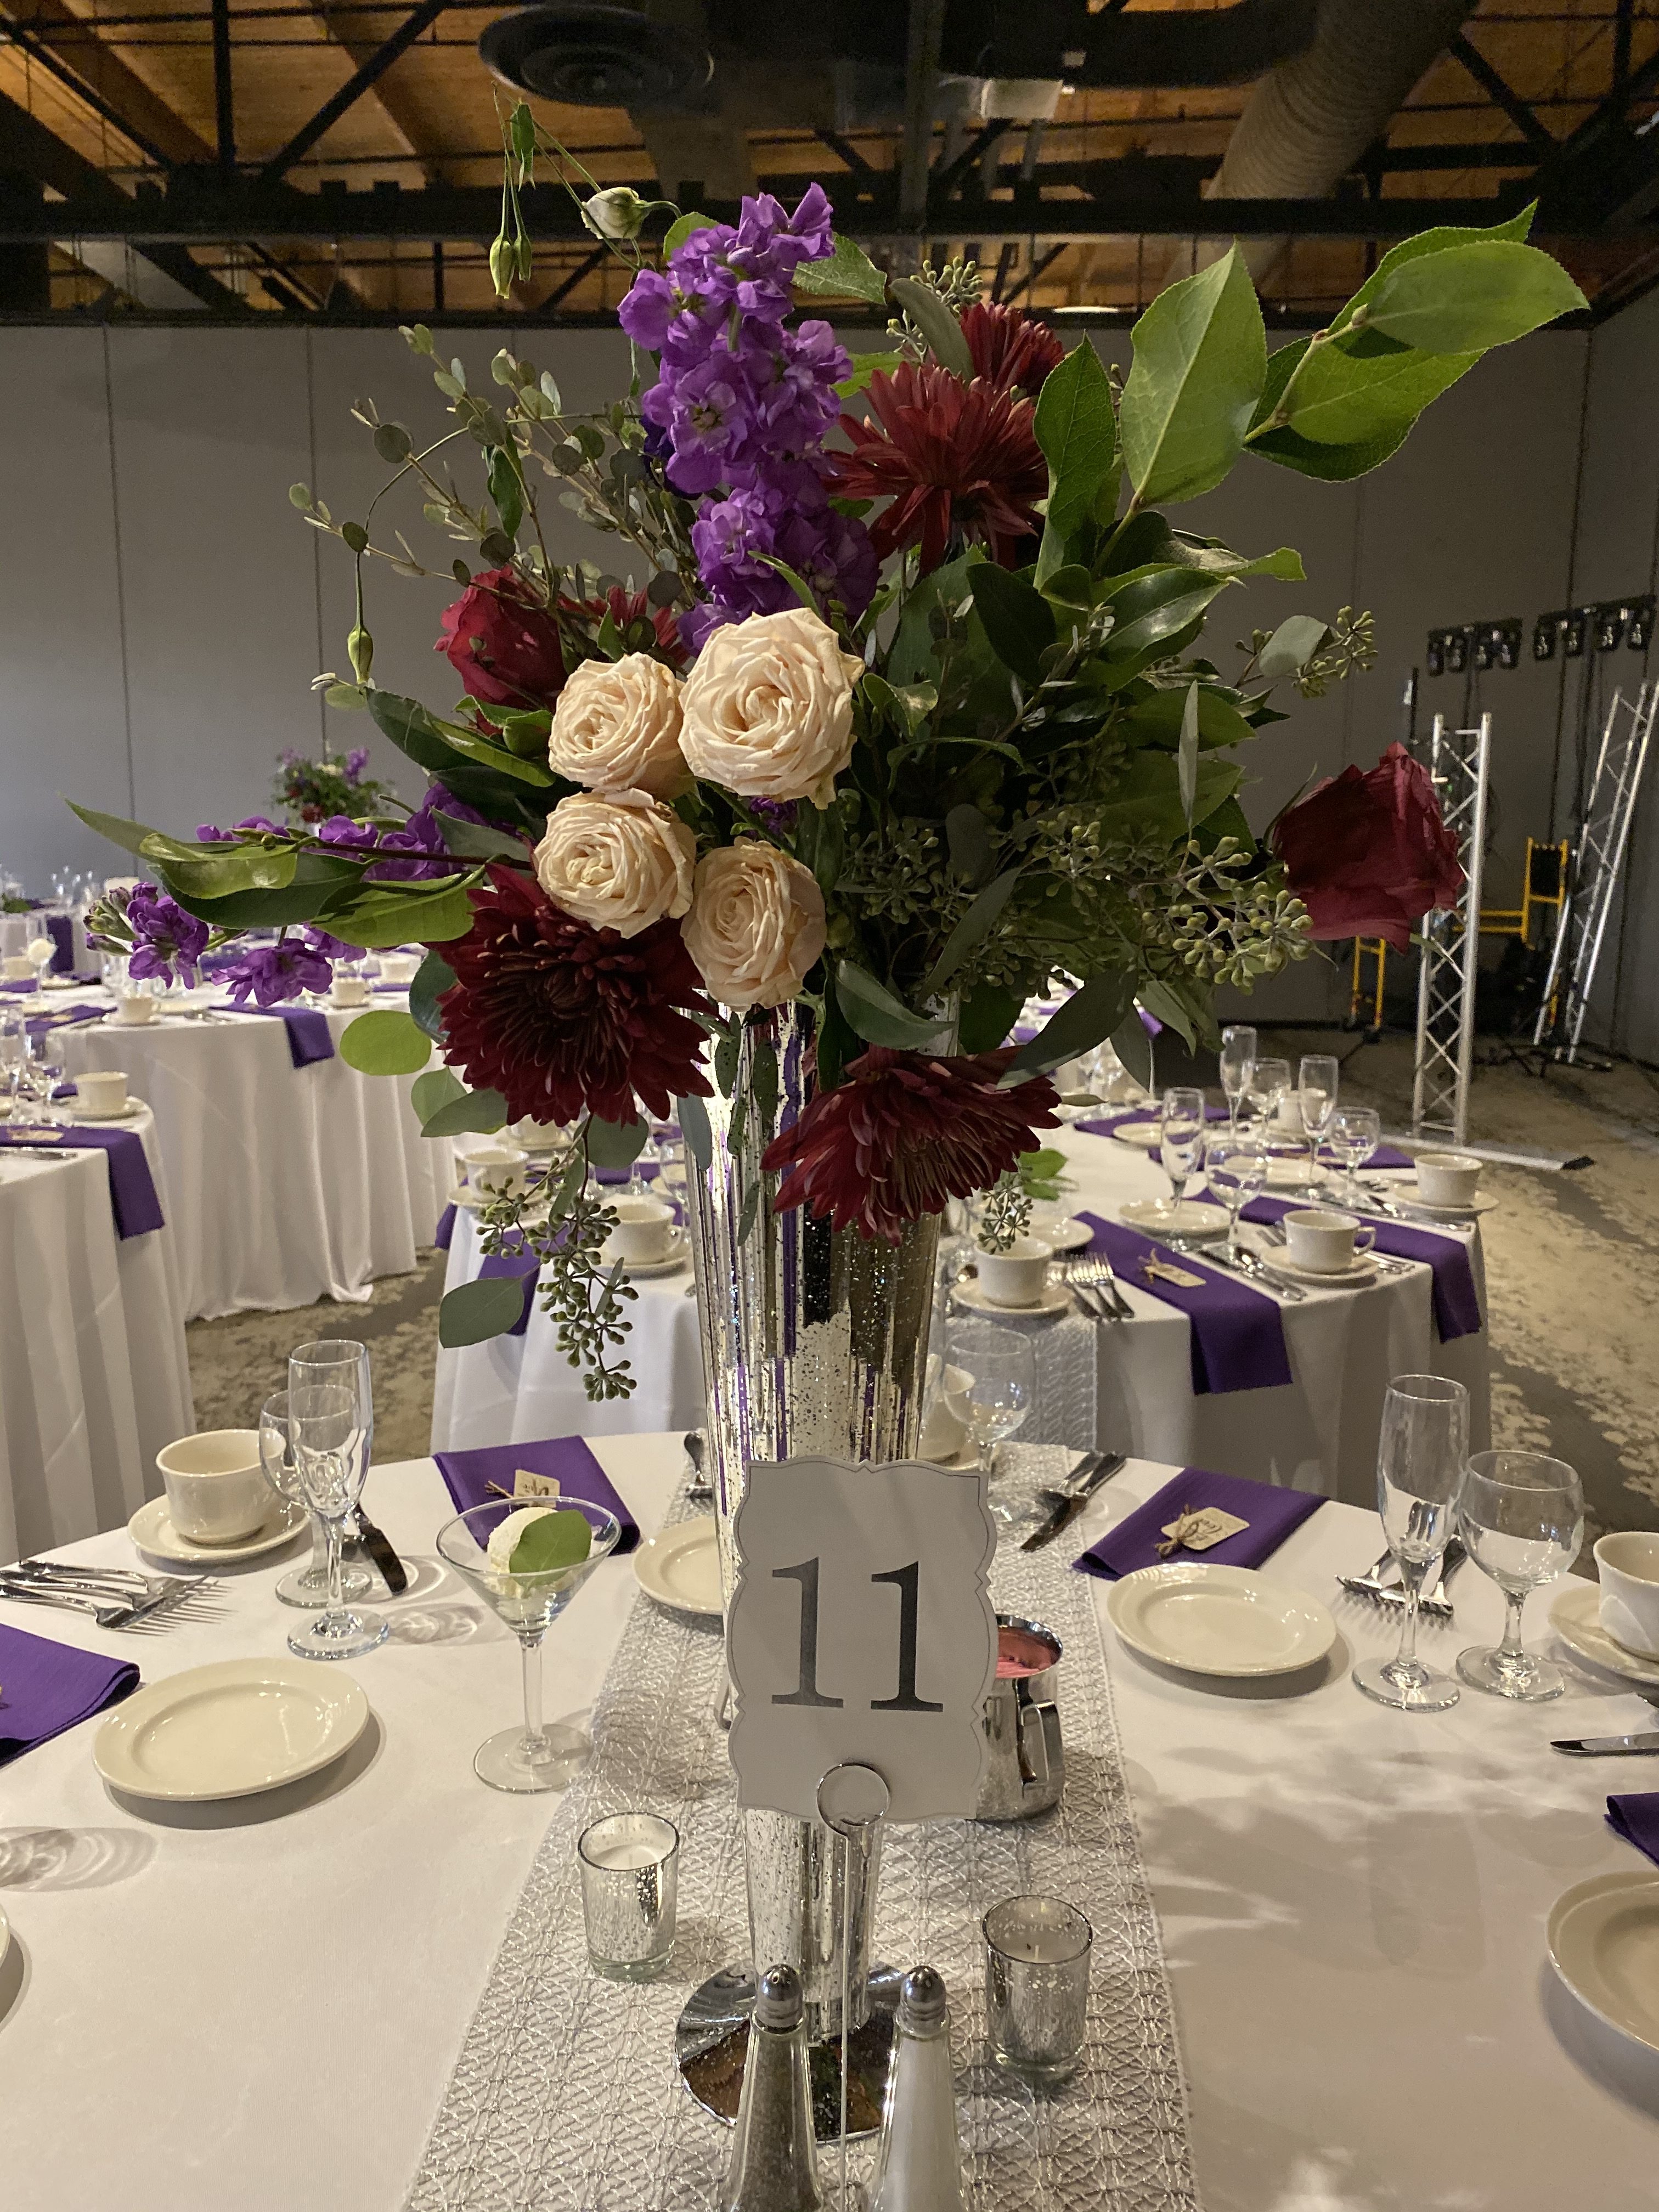 Floral Centerpieces created by Avalon Gardens accented the gorgeous linens provided by L'Nique.